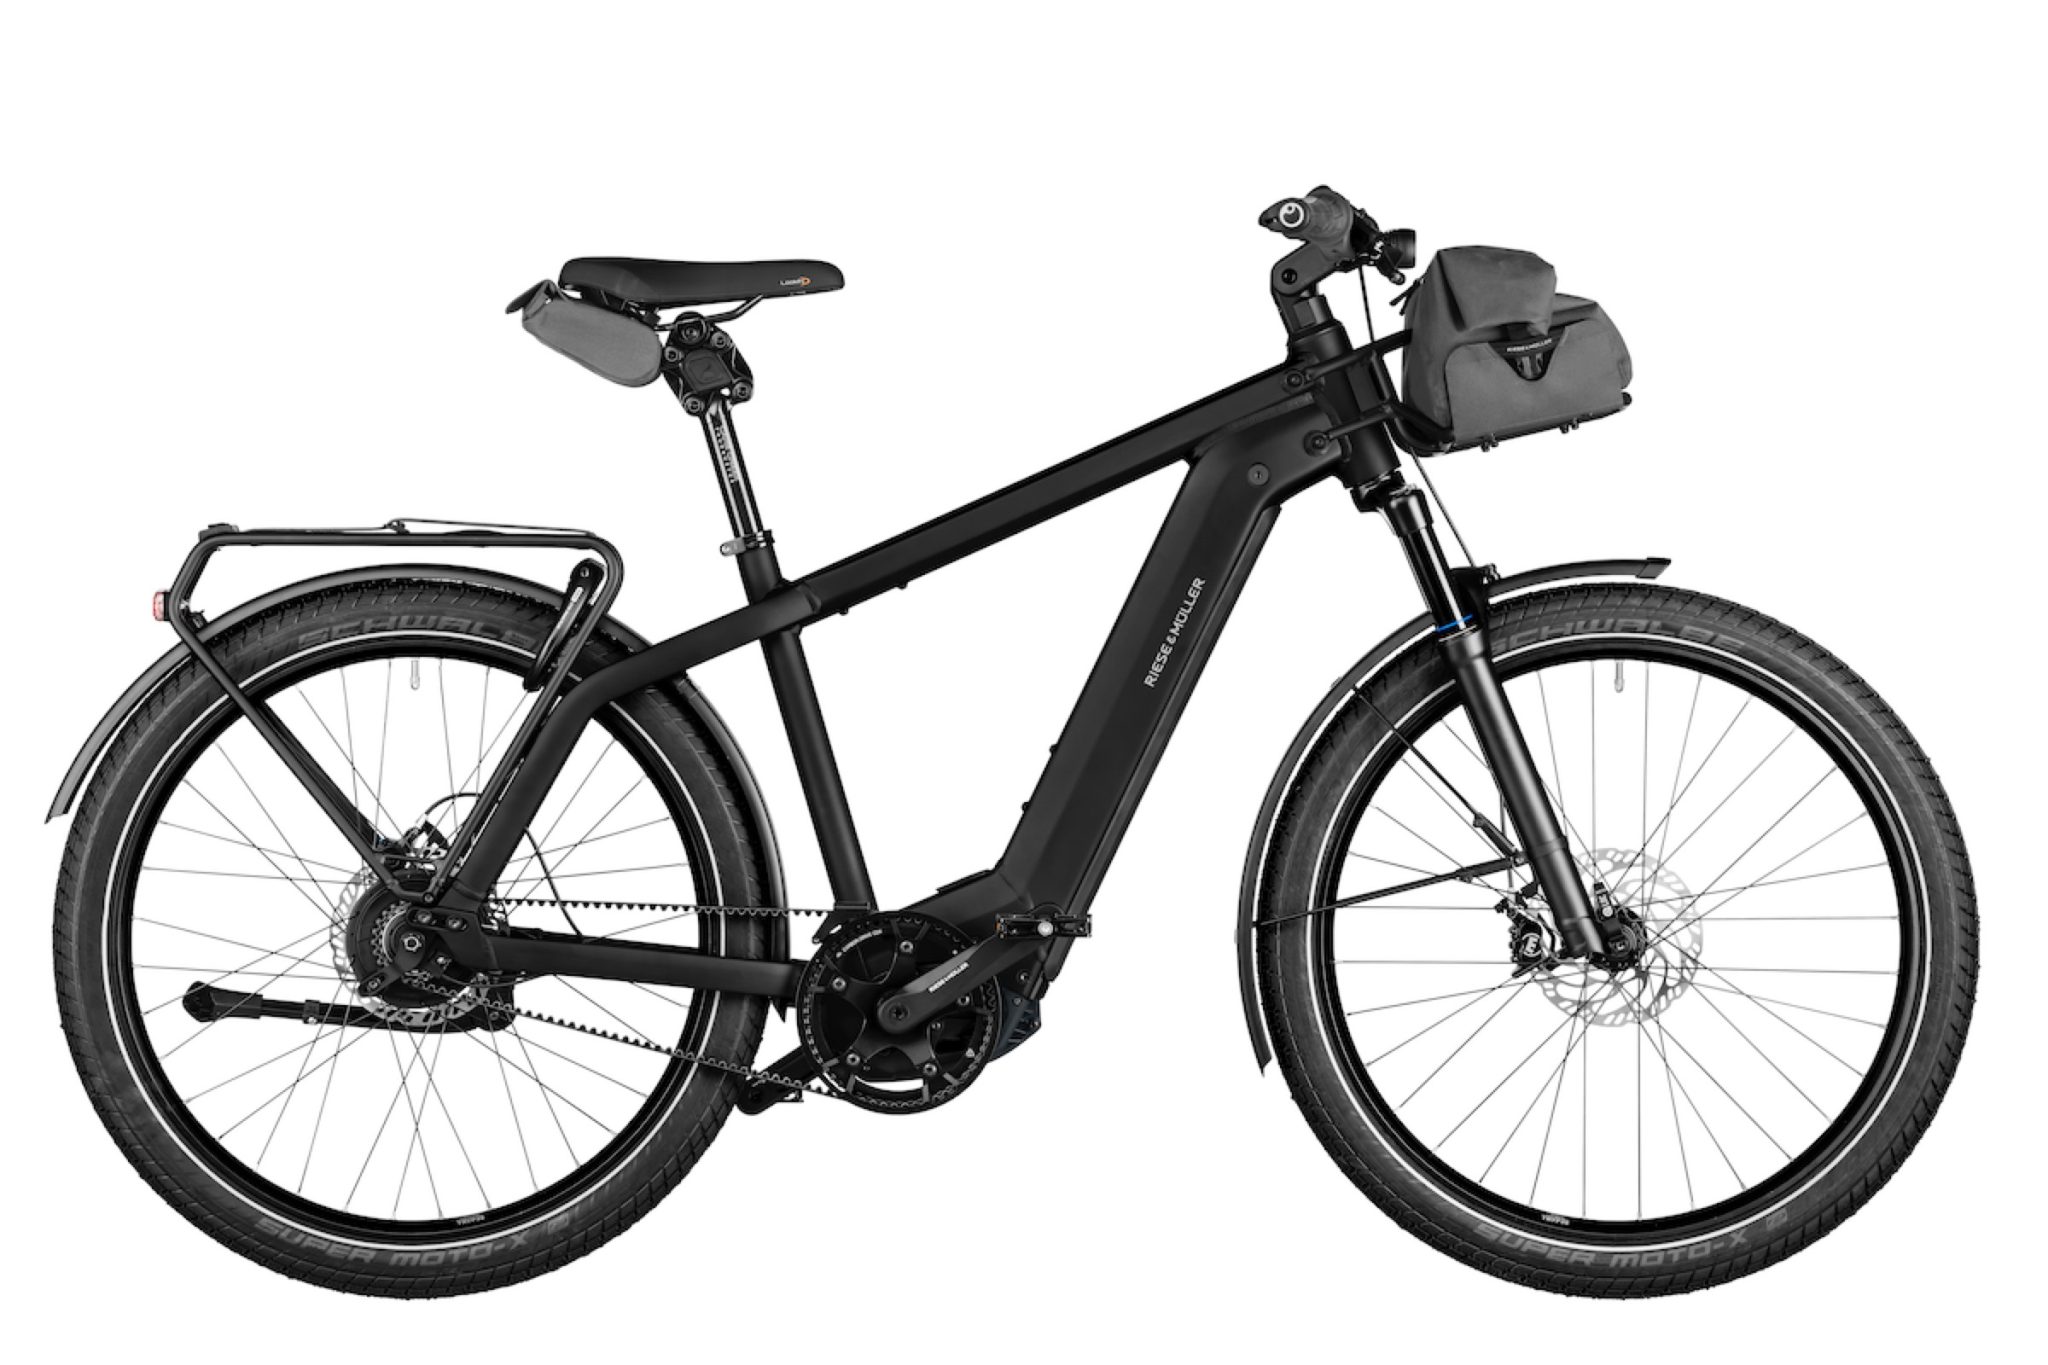 Riese & Müller Charger4 GT Vario » eloVelo